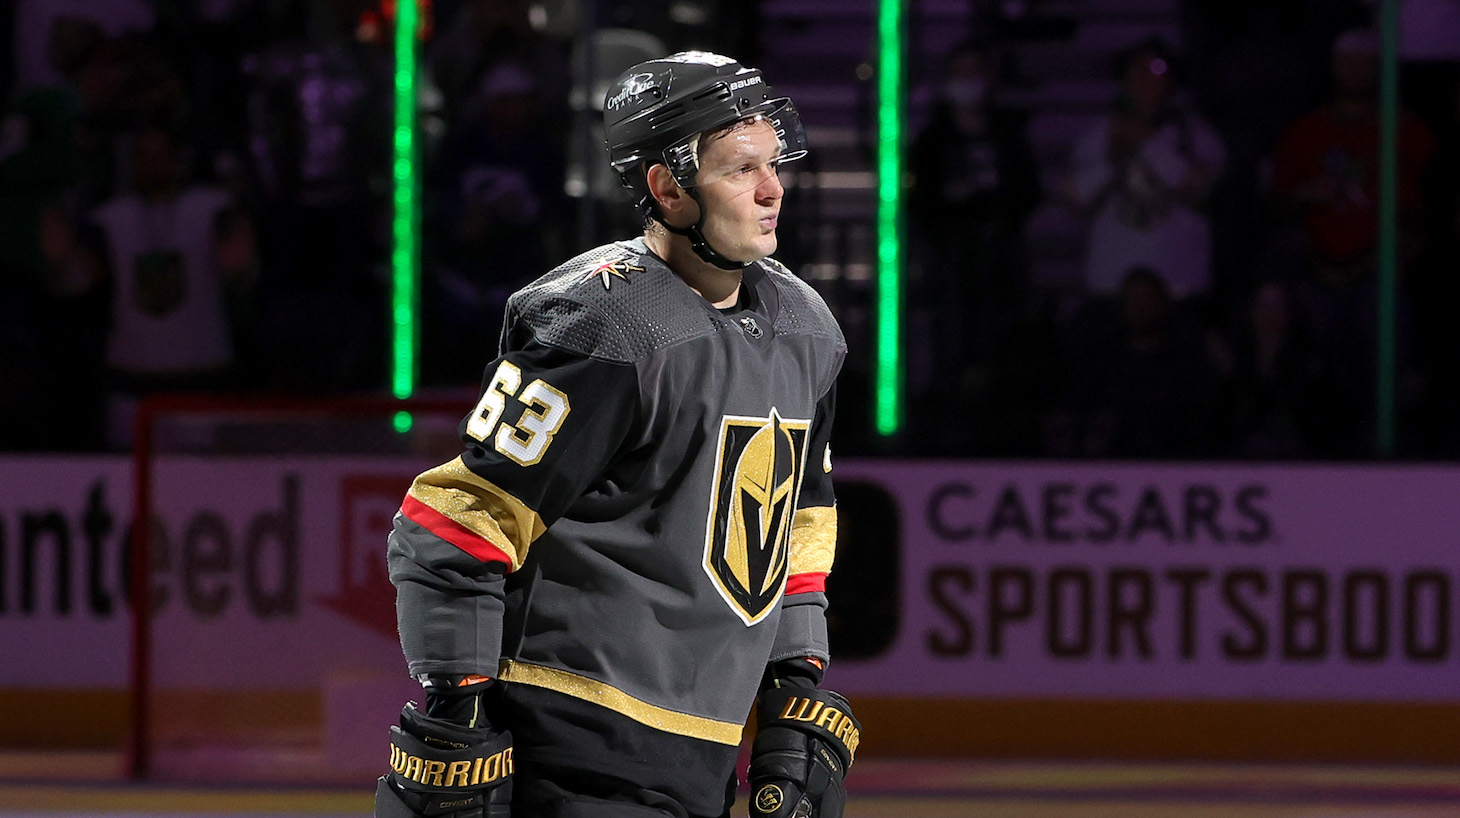 LAS VEGAS, NEVADA - MARCH 17: Evgenii Dadonov #63 of the Vegas Golden Knights skates on the ice after being named the first star of the game following the team's 5-3 victory over the Florida Panthers at T-Mobile Arena on March 17, 2022 in Las Vegas, Nevada. (Photo by Ethan Miller/Getty Images)